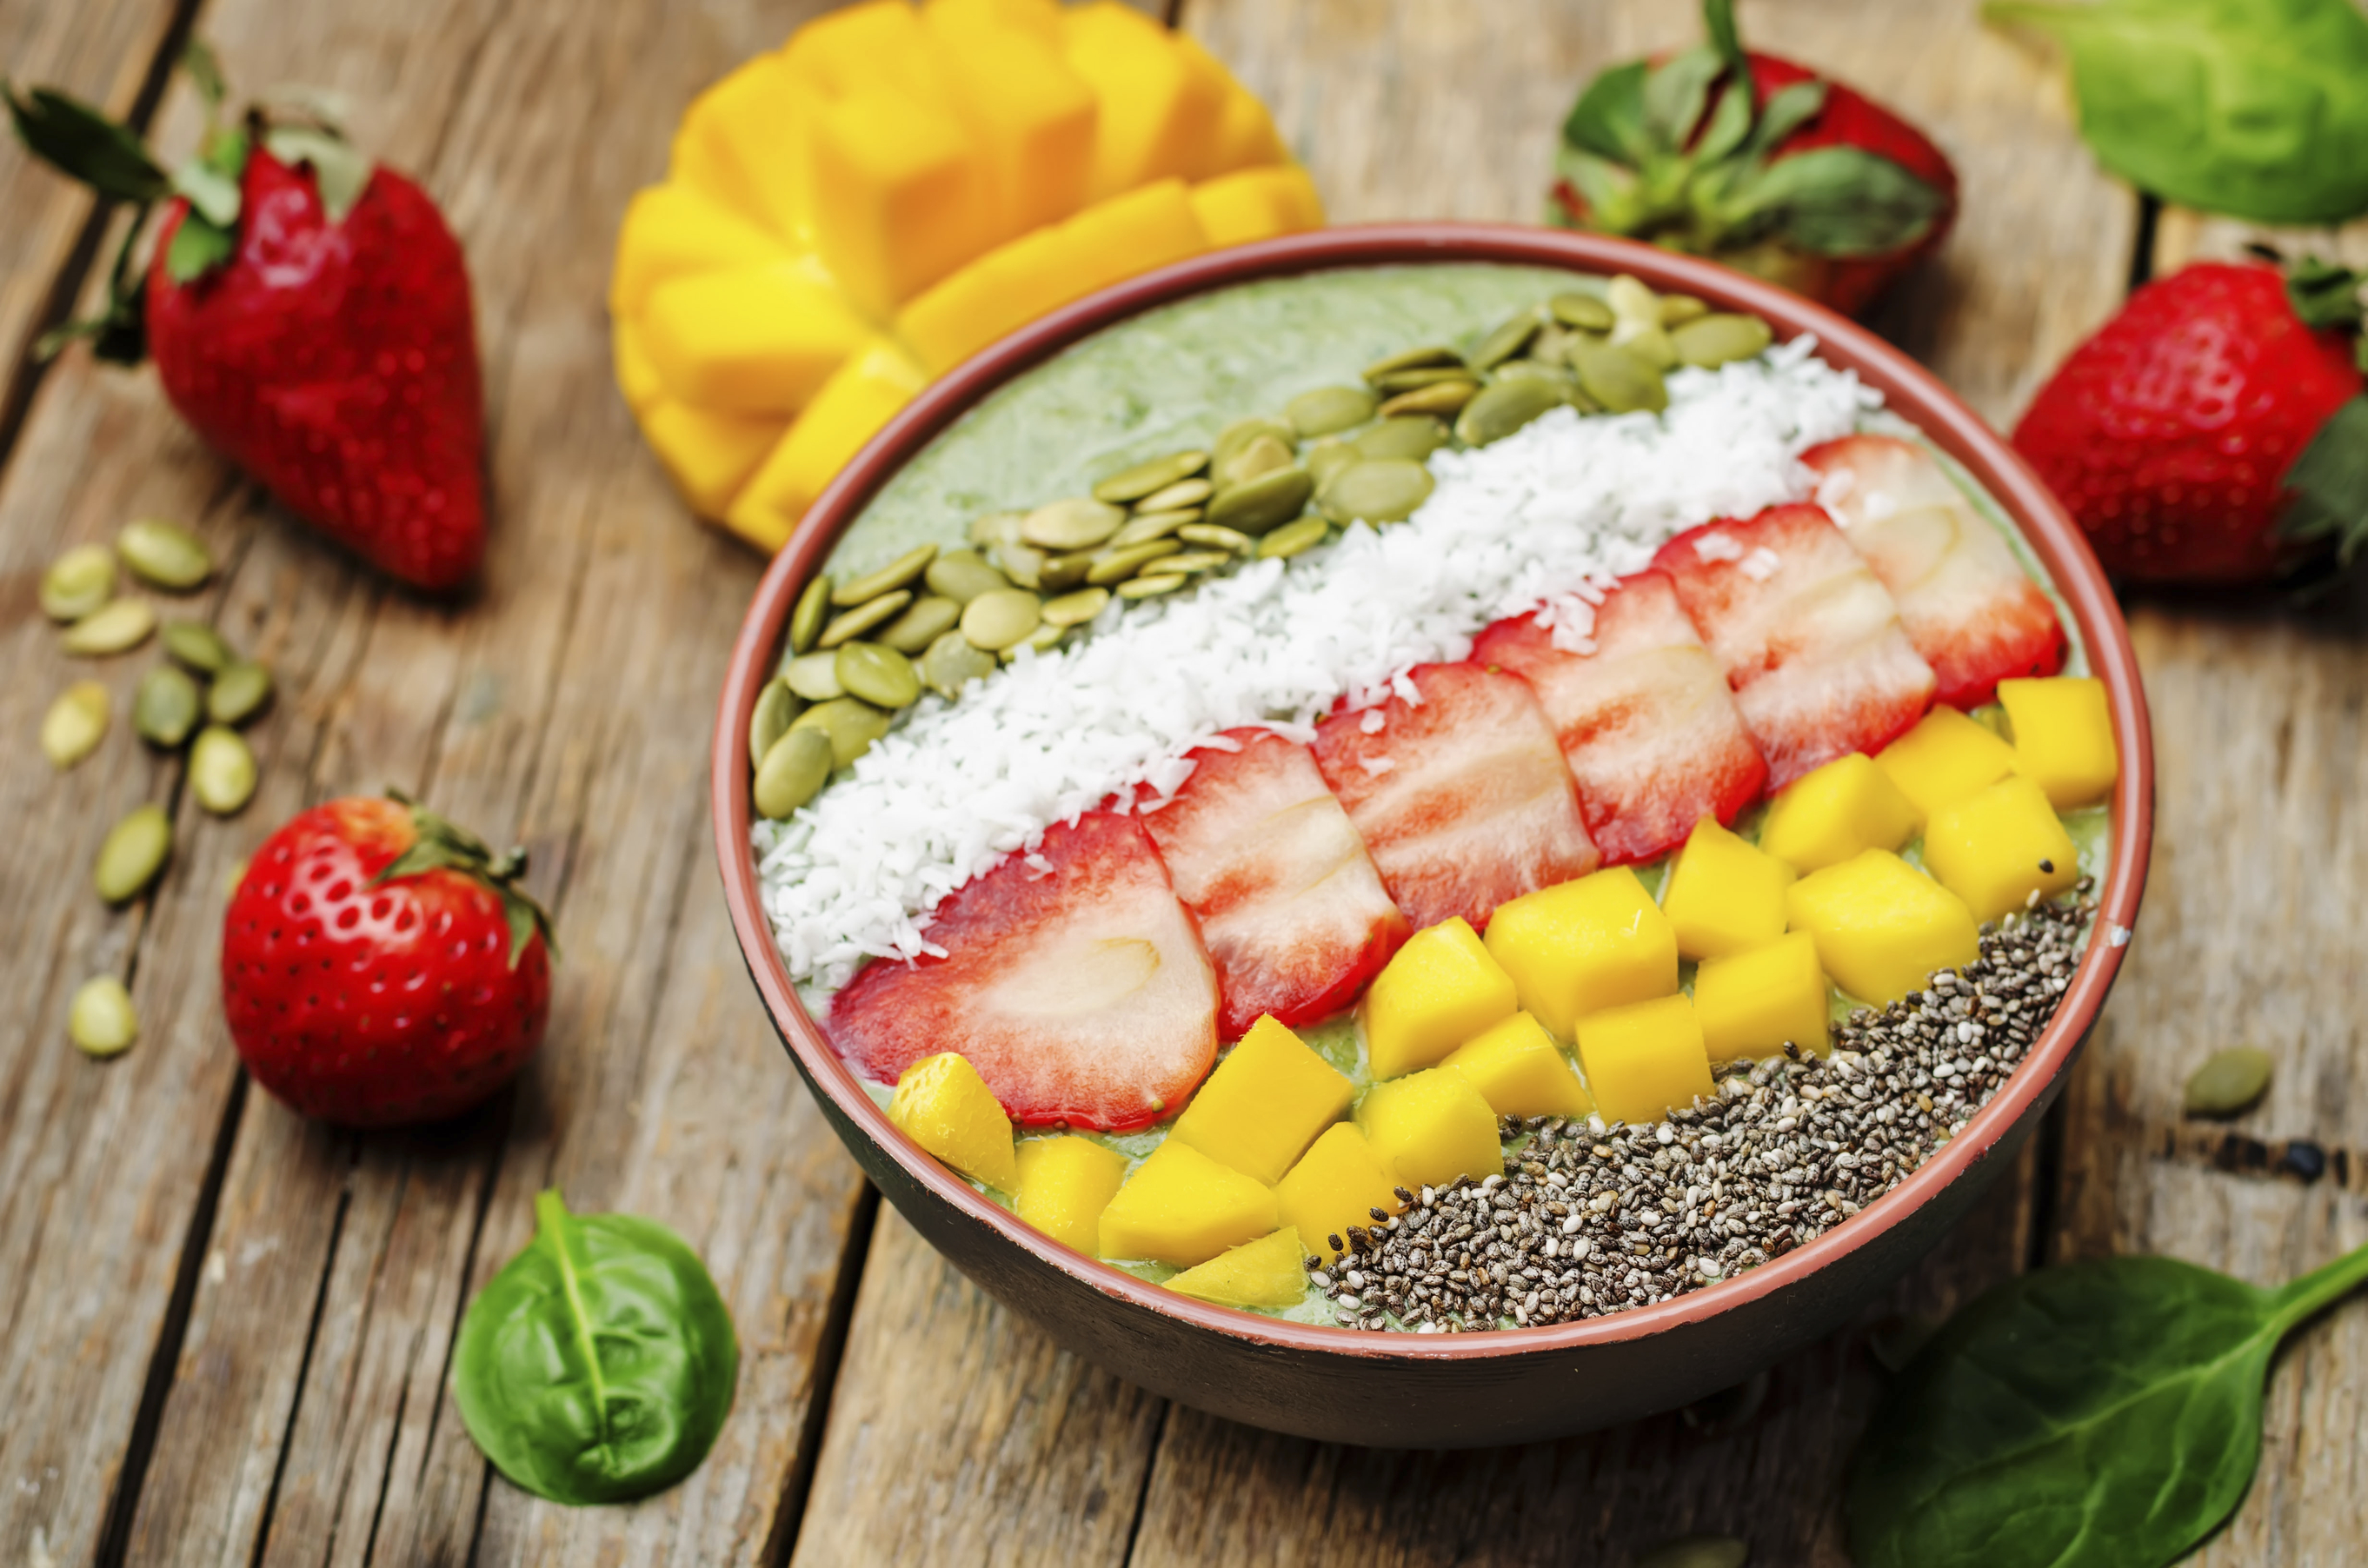 Spinach smoothie bowl with strawberries, coconut, mango, pumpkin seeds